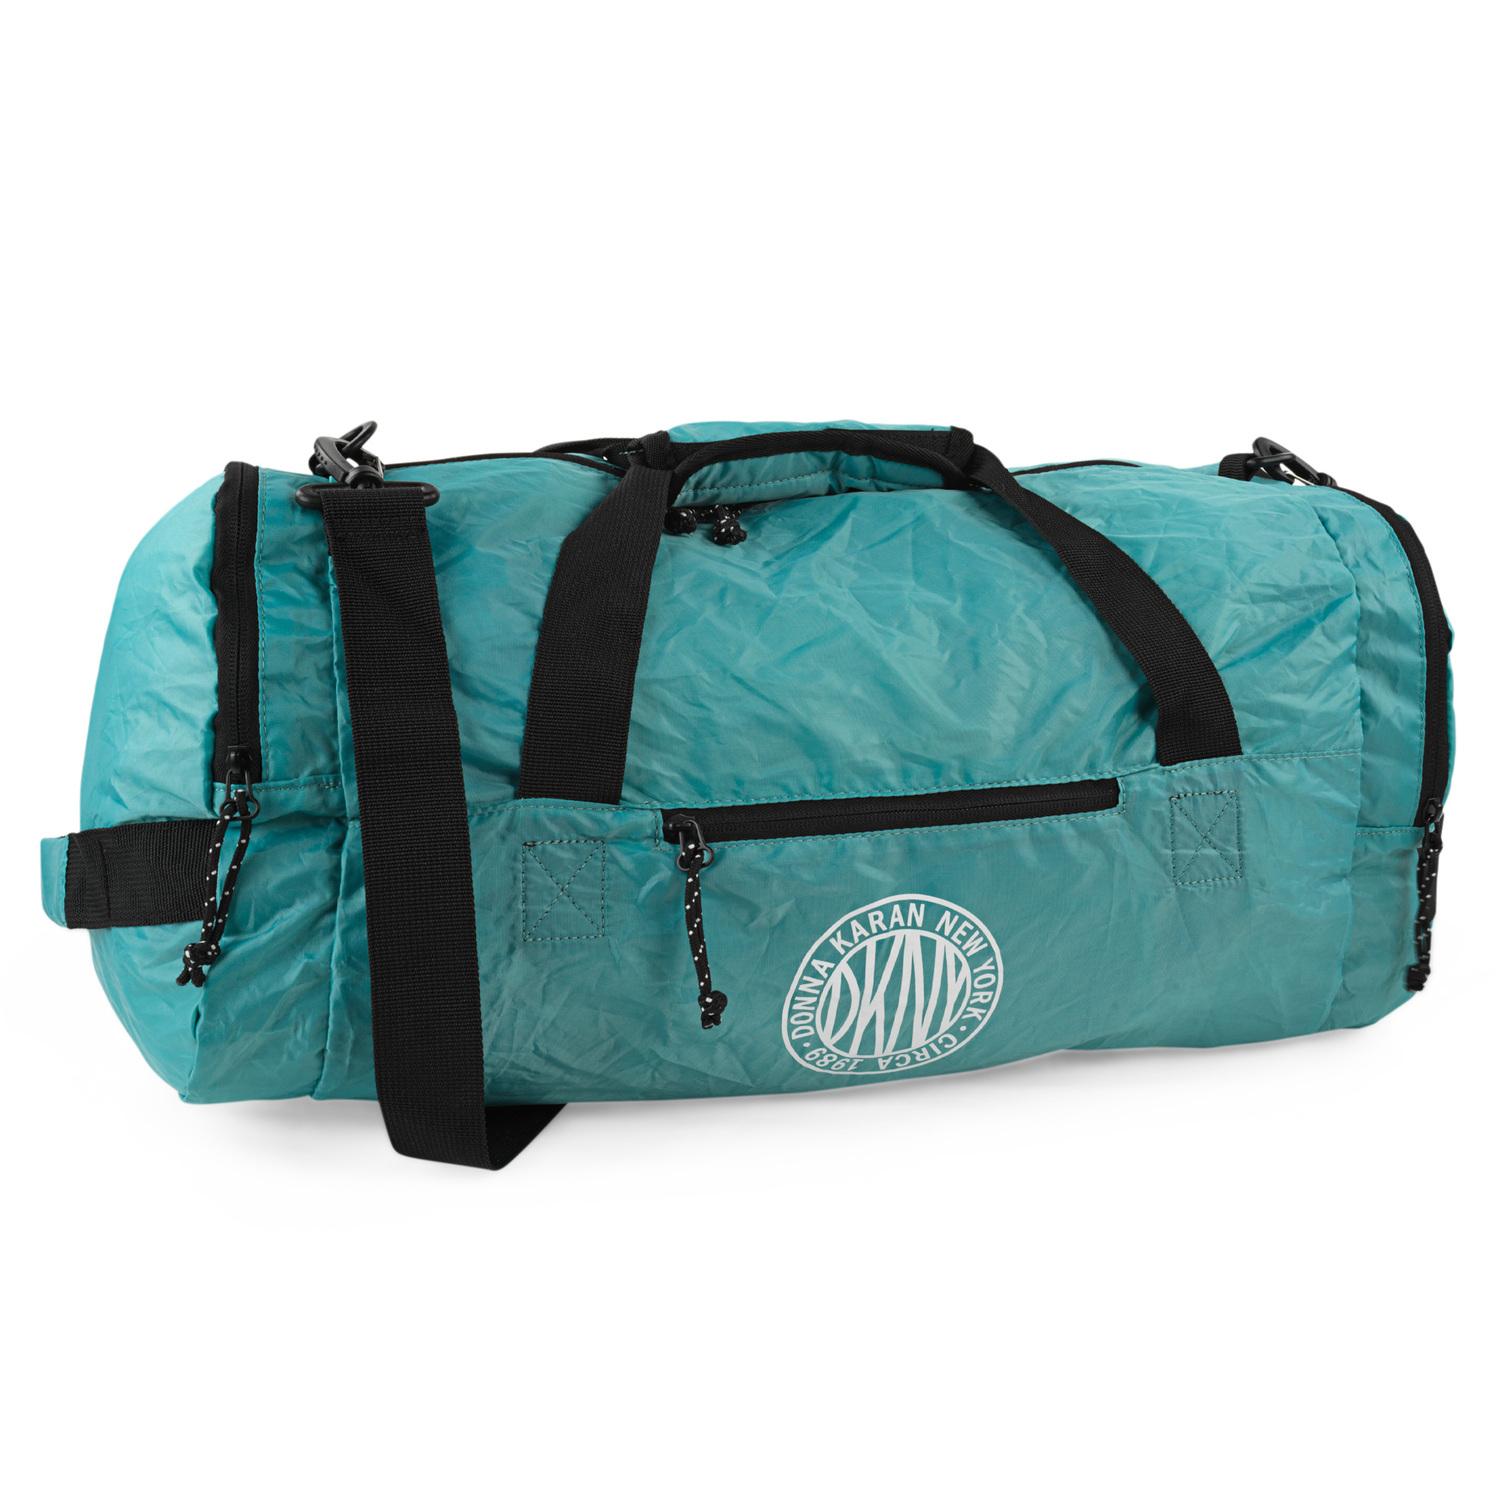 DKNY-928 PACKABLE DUFFLE